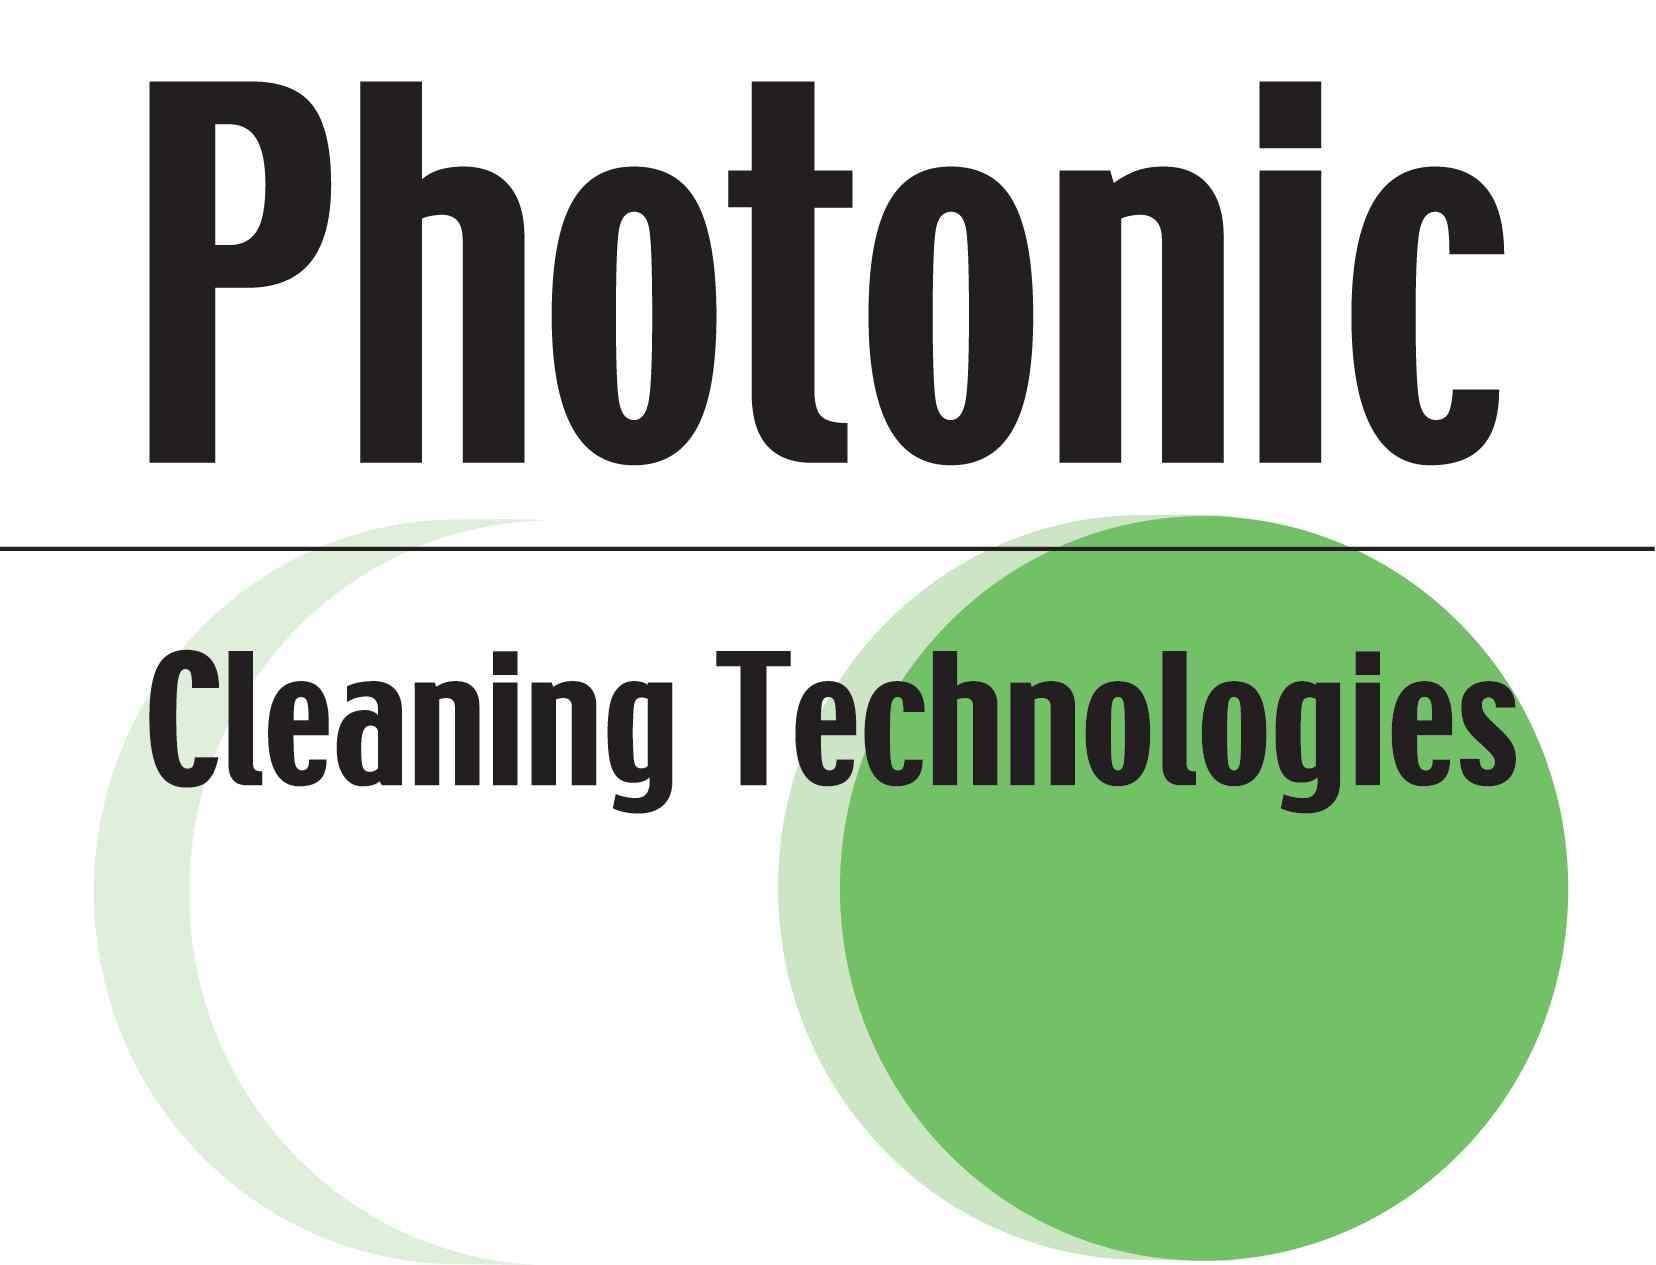 Photonic Cleaning Technologies